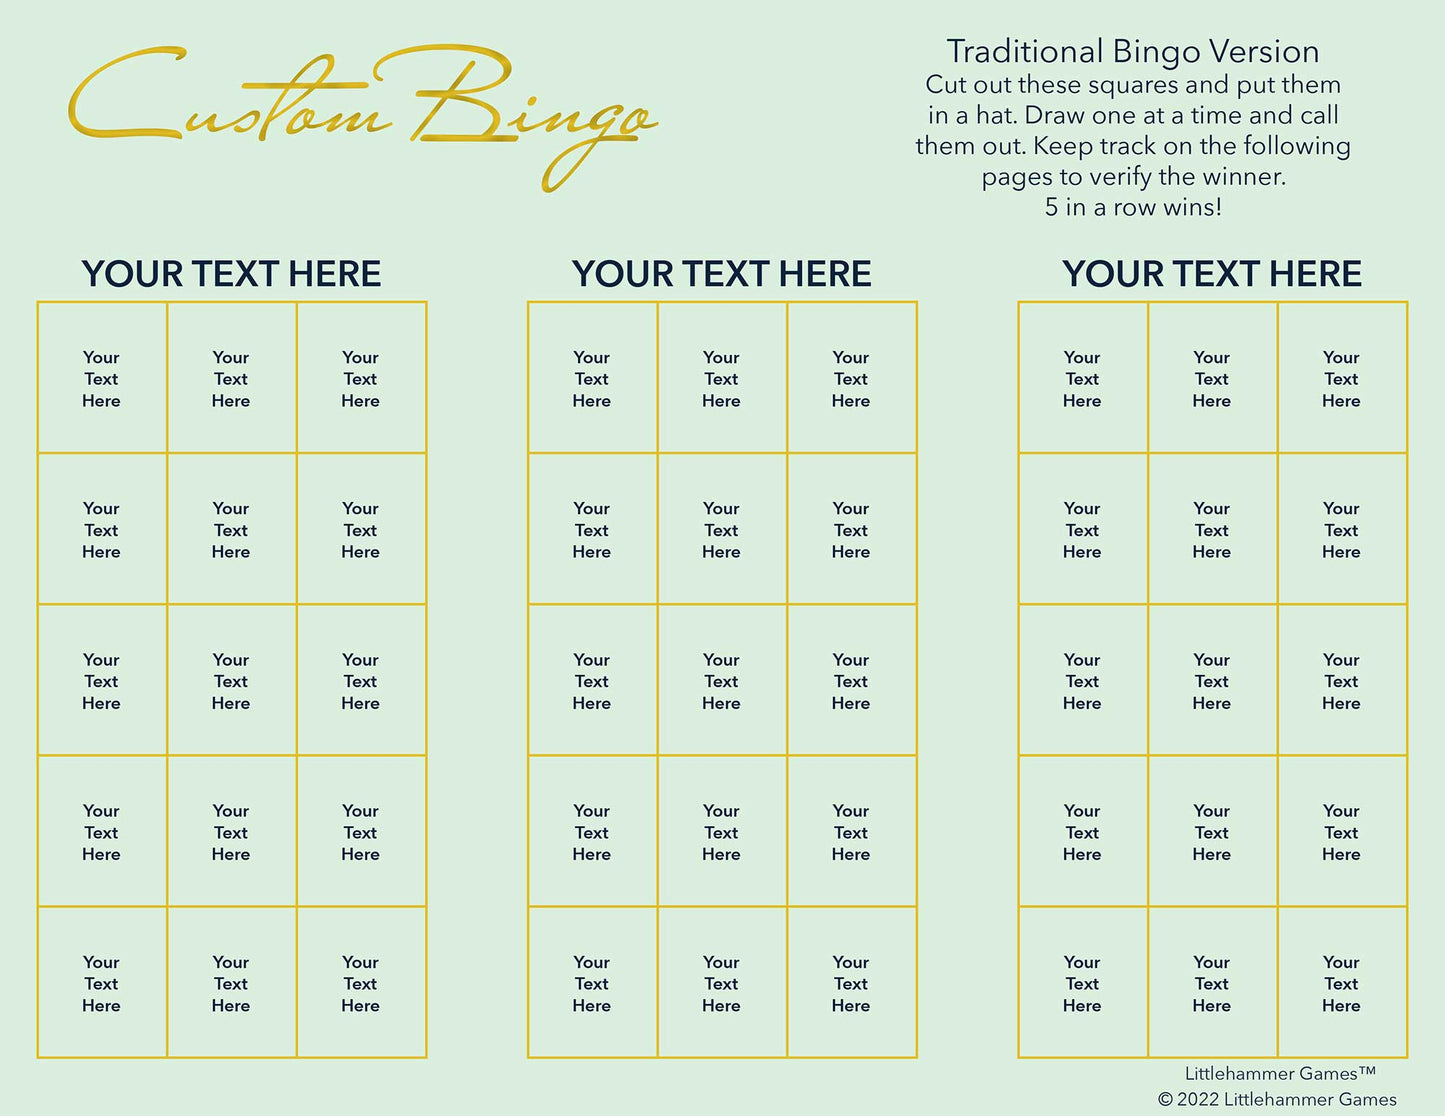 Custom Bingo calling card with gold text on a mint background